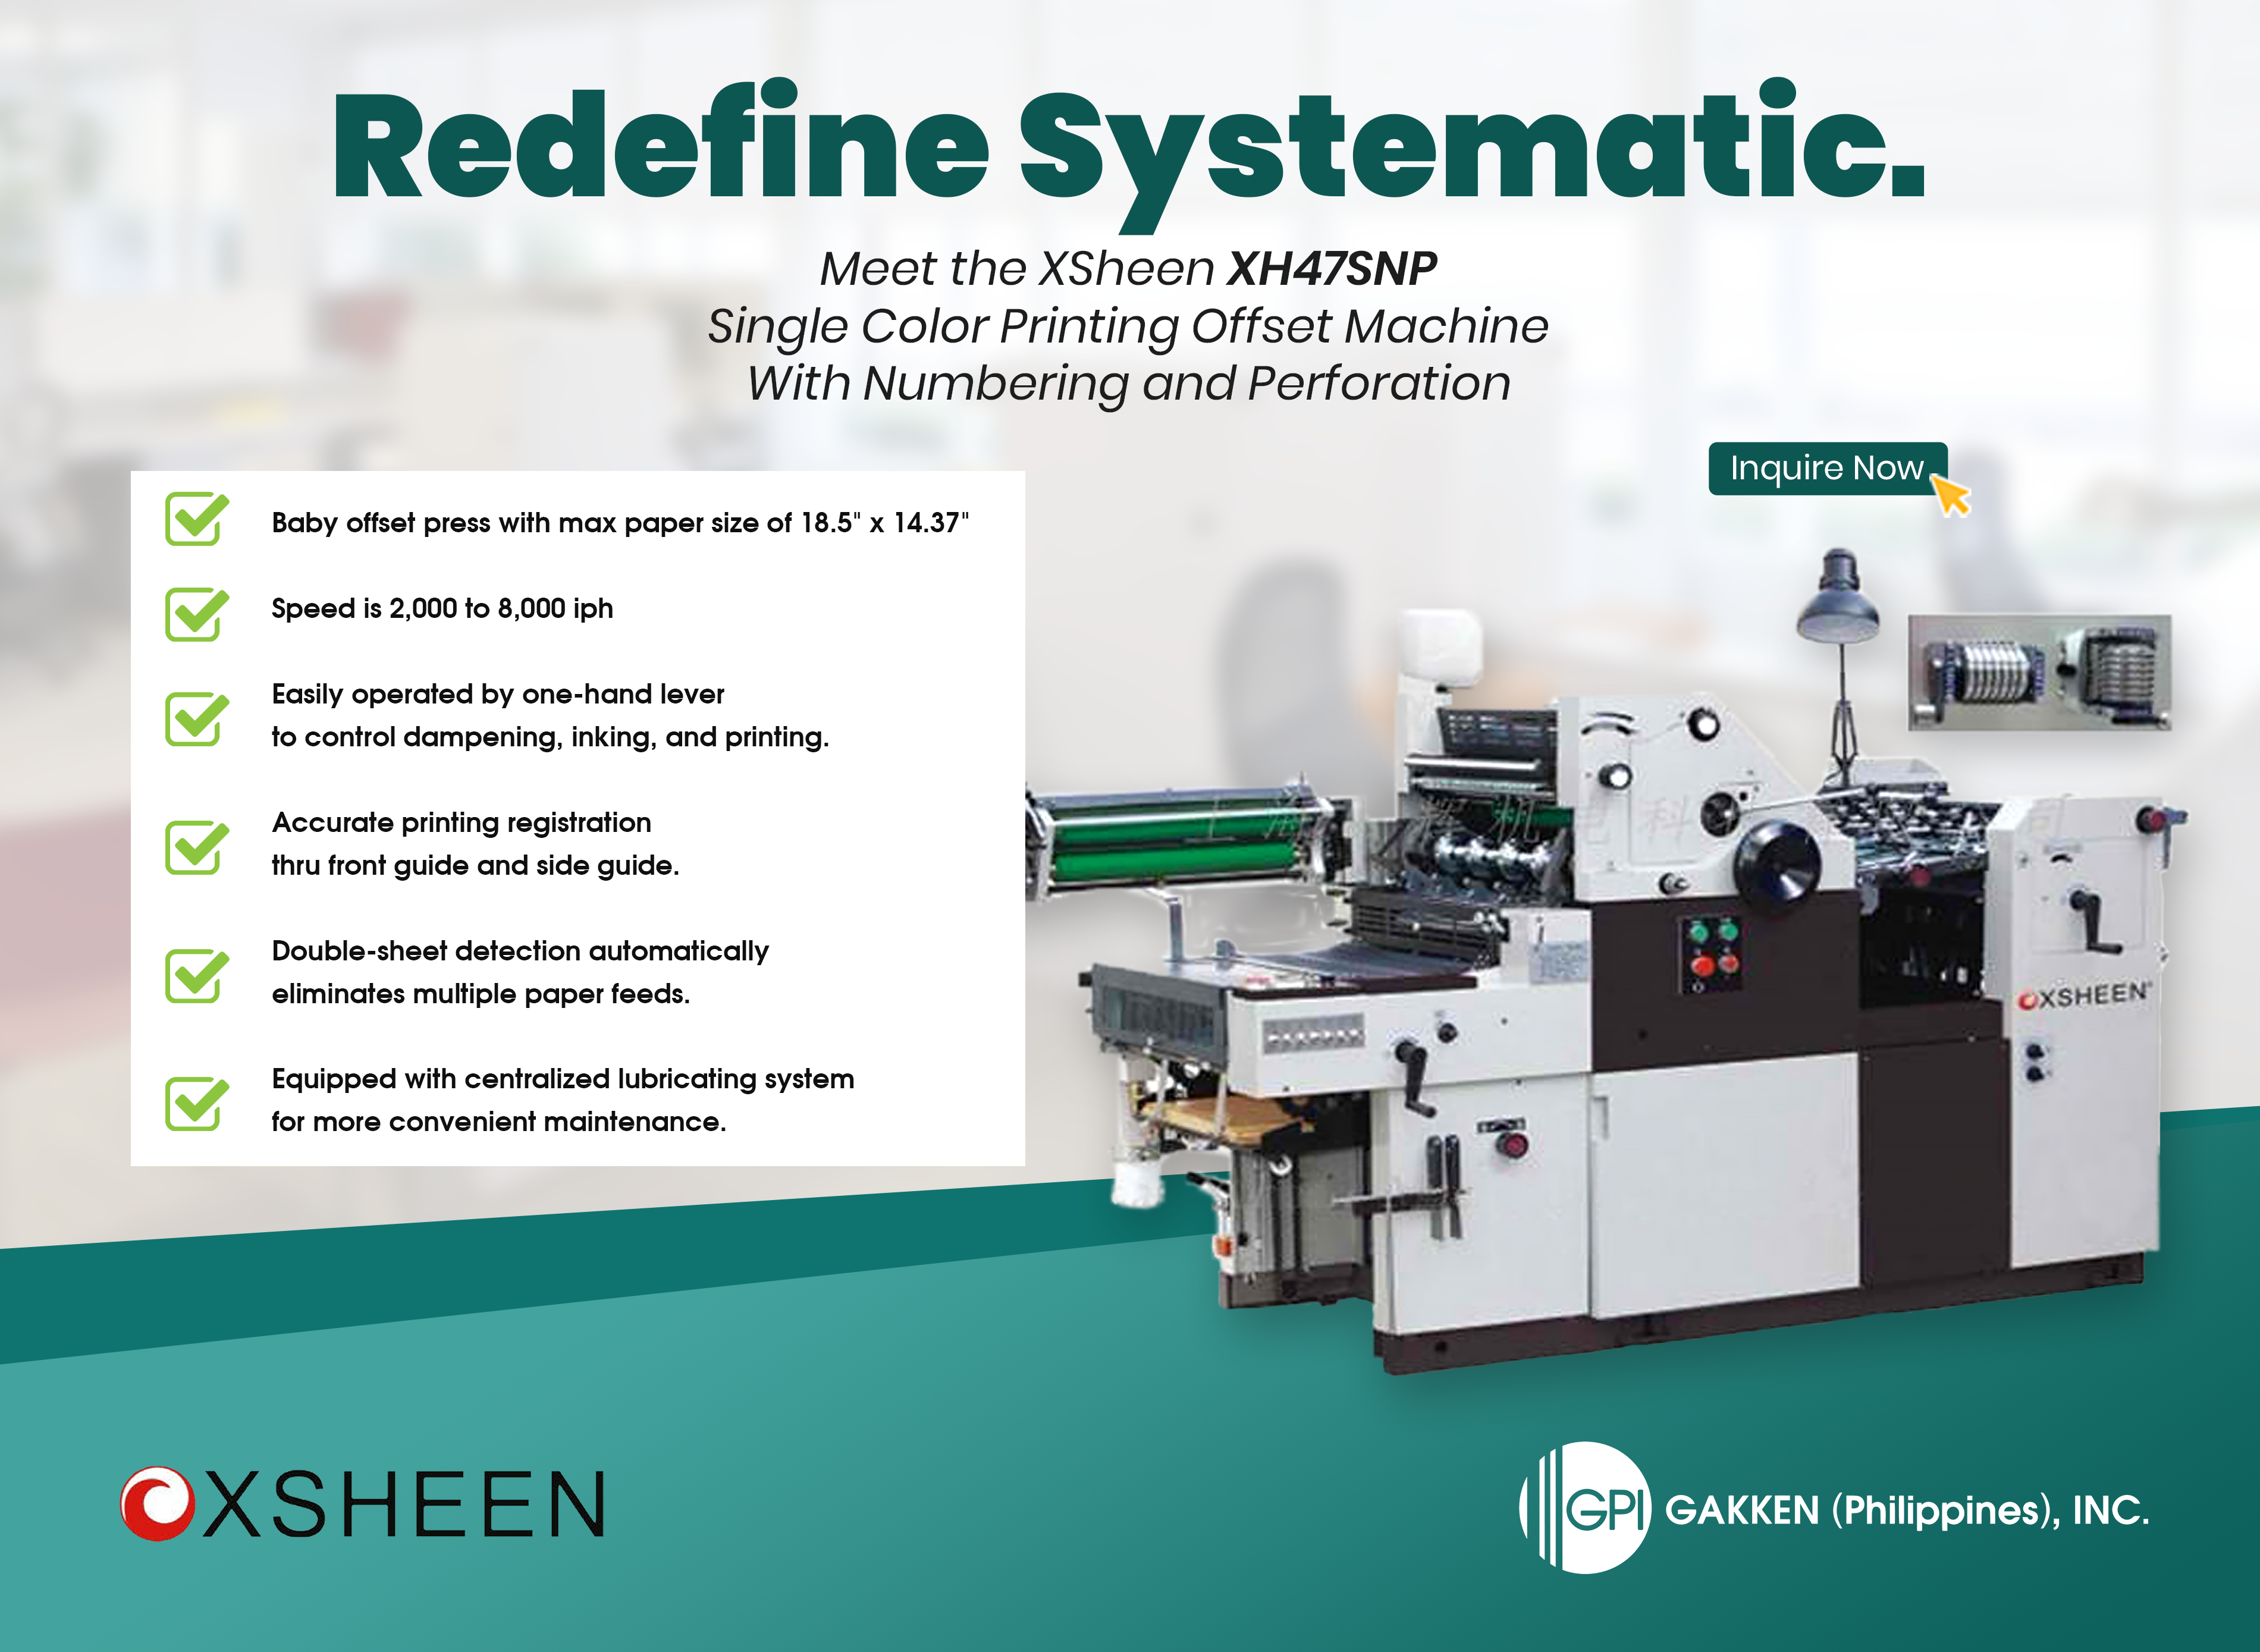 Meet XSheen XH47SNP – The Single Color Baby Offset Printing Machine with Numbering and Perforation